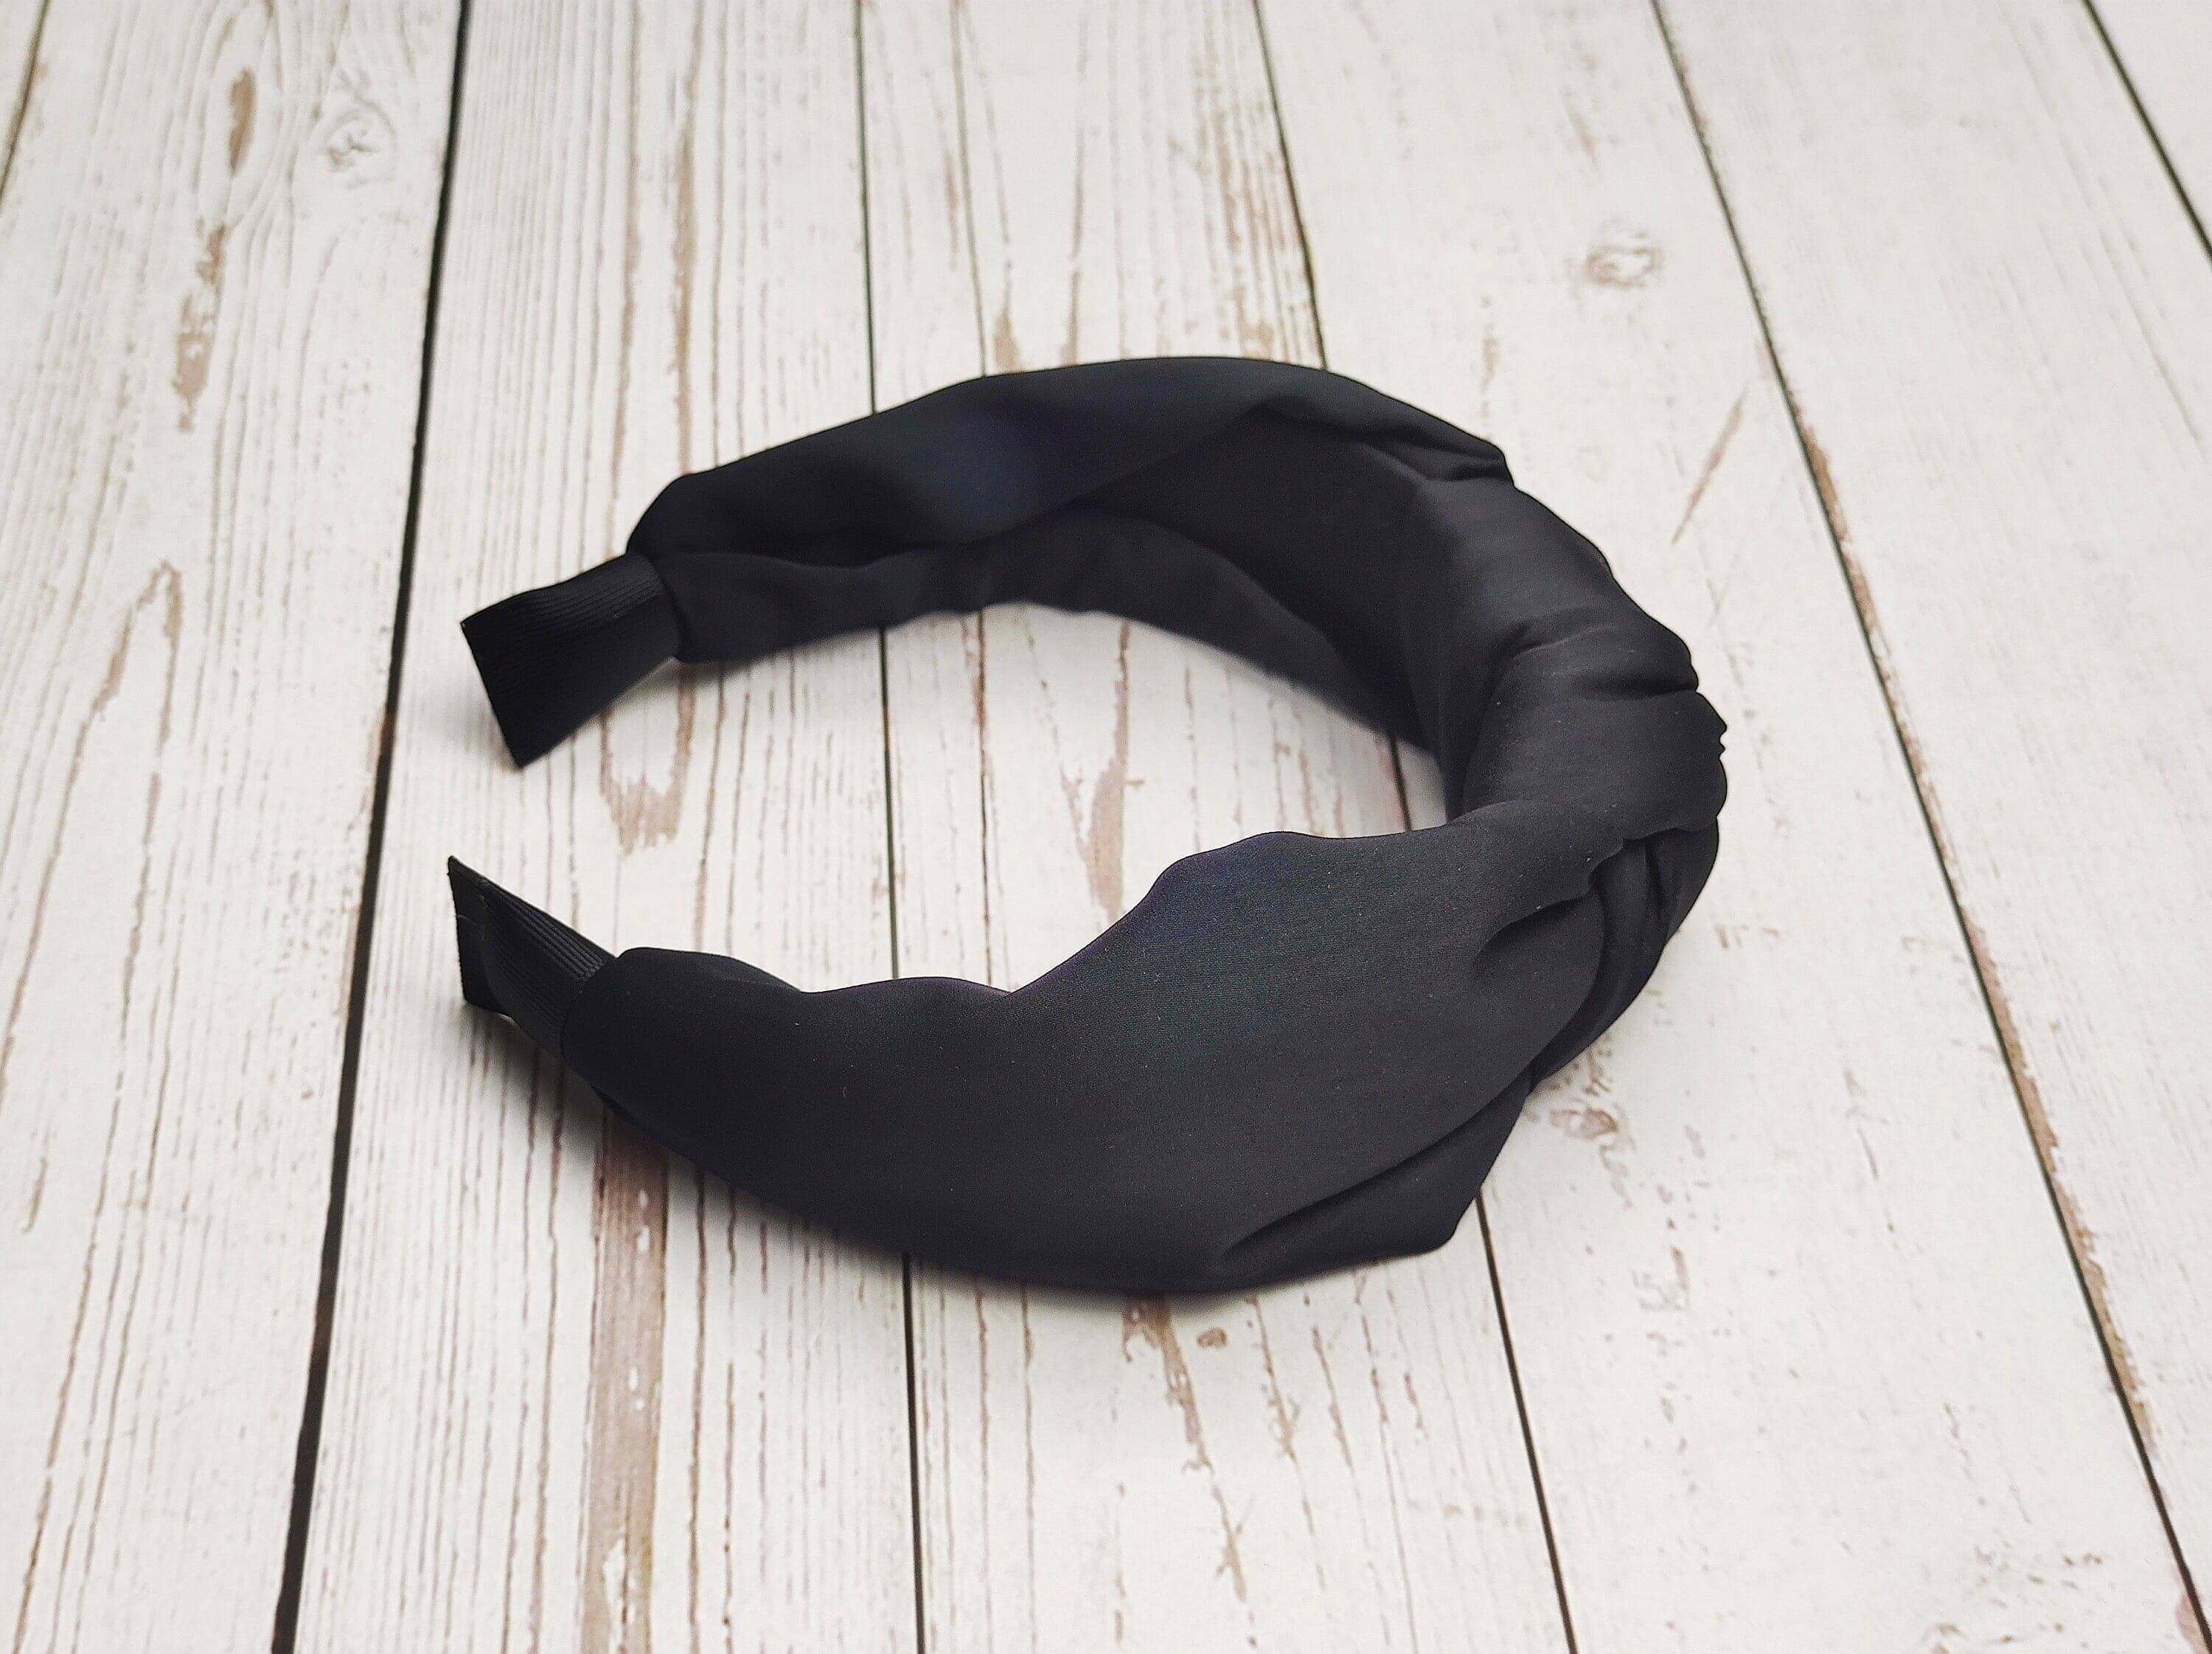 Get your stylish and comfortable Black Twist Knot Headband from now onwards! This headband is made from soft and durable viscose crepe, making it perfect for all your fashion needs.